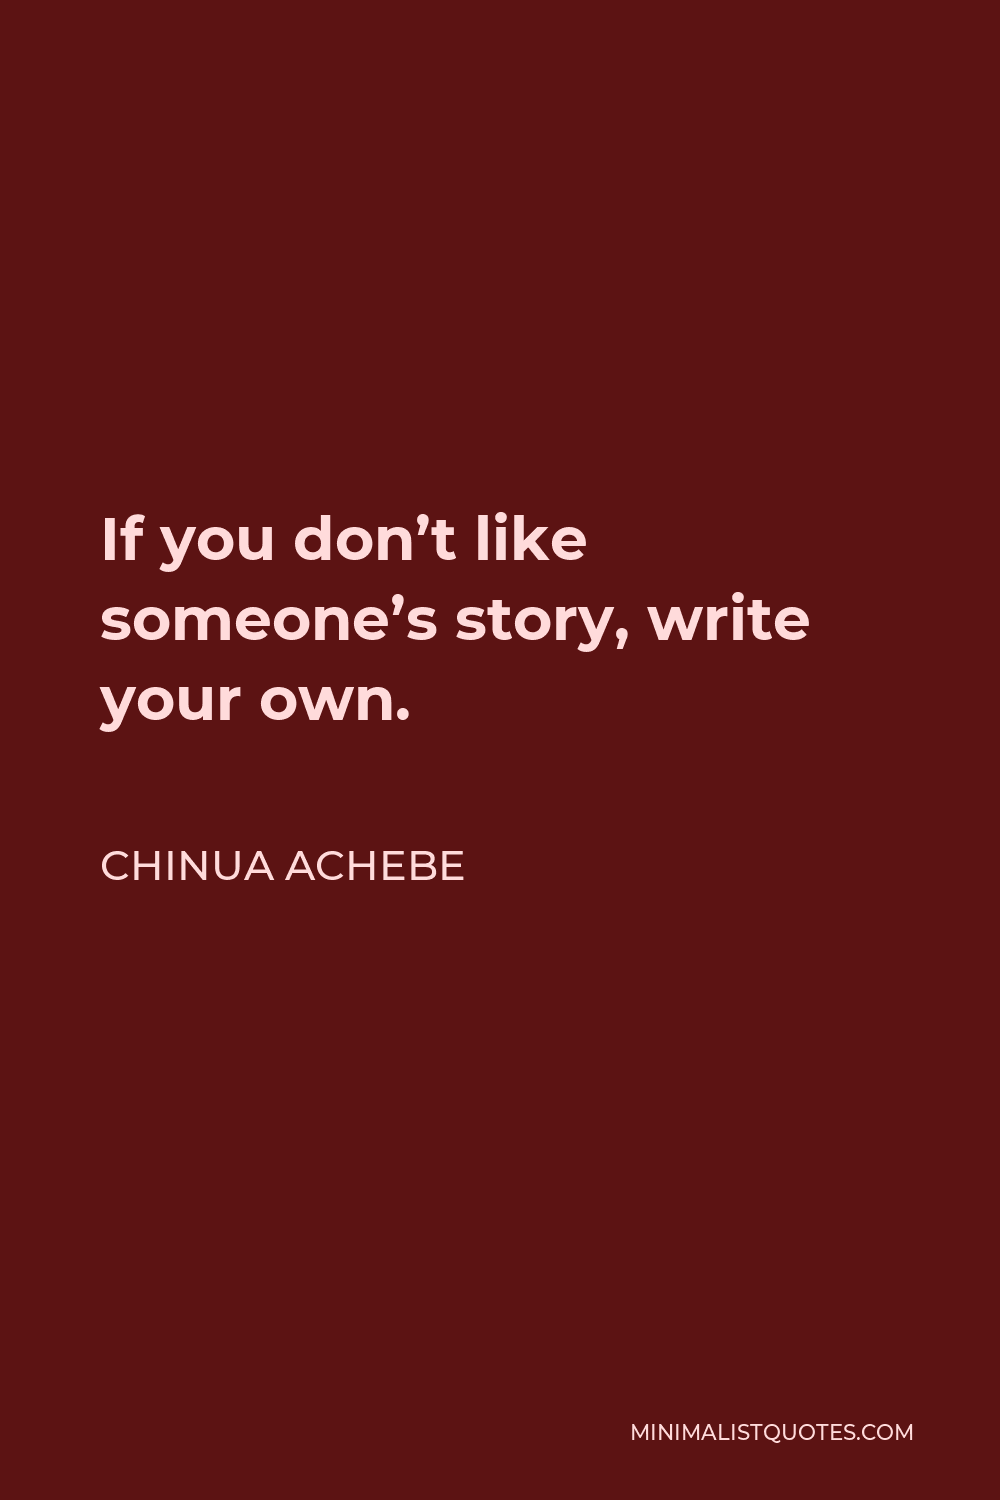 Chinua Achebe Quote - If you don’t like someone’s story, write your own.